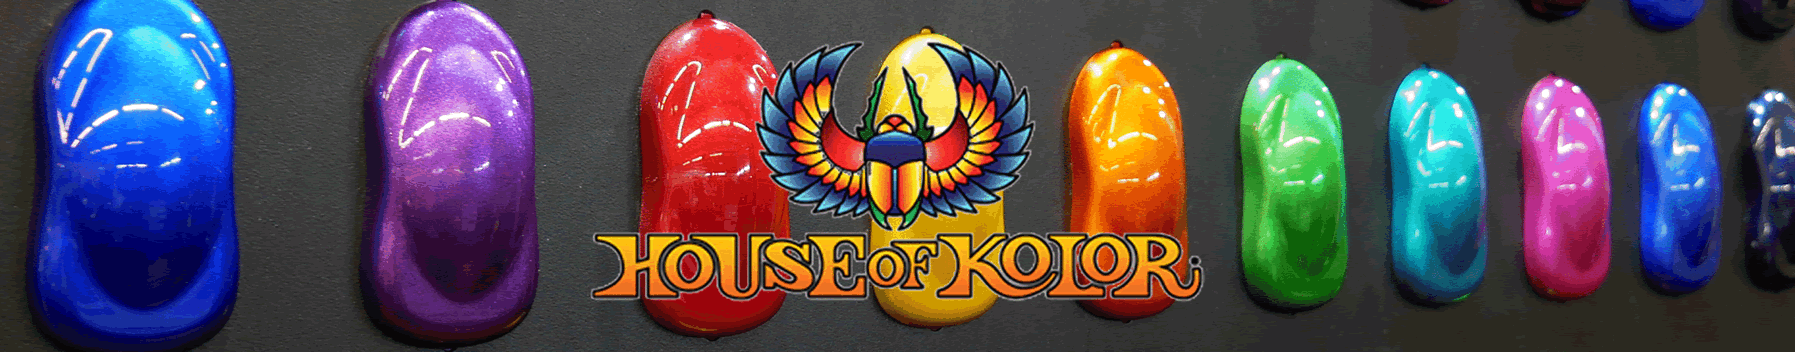 House Of Kolor From Jawel Paints - Car Spray Paint Colour Chart Uk